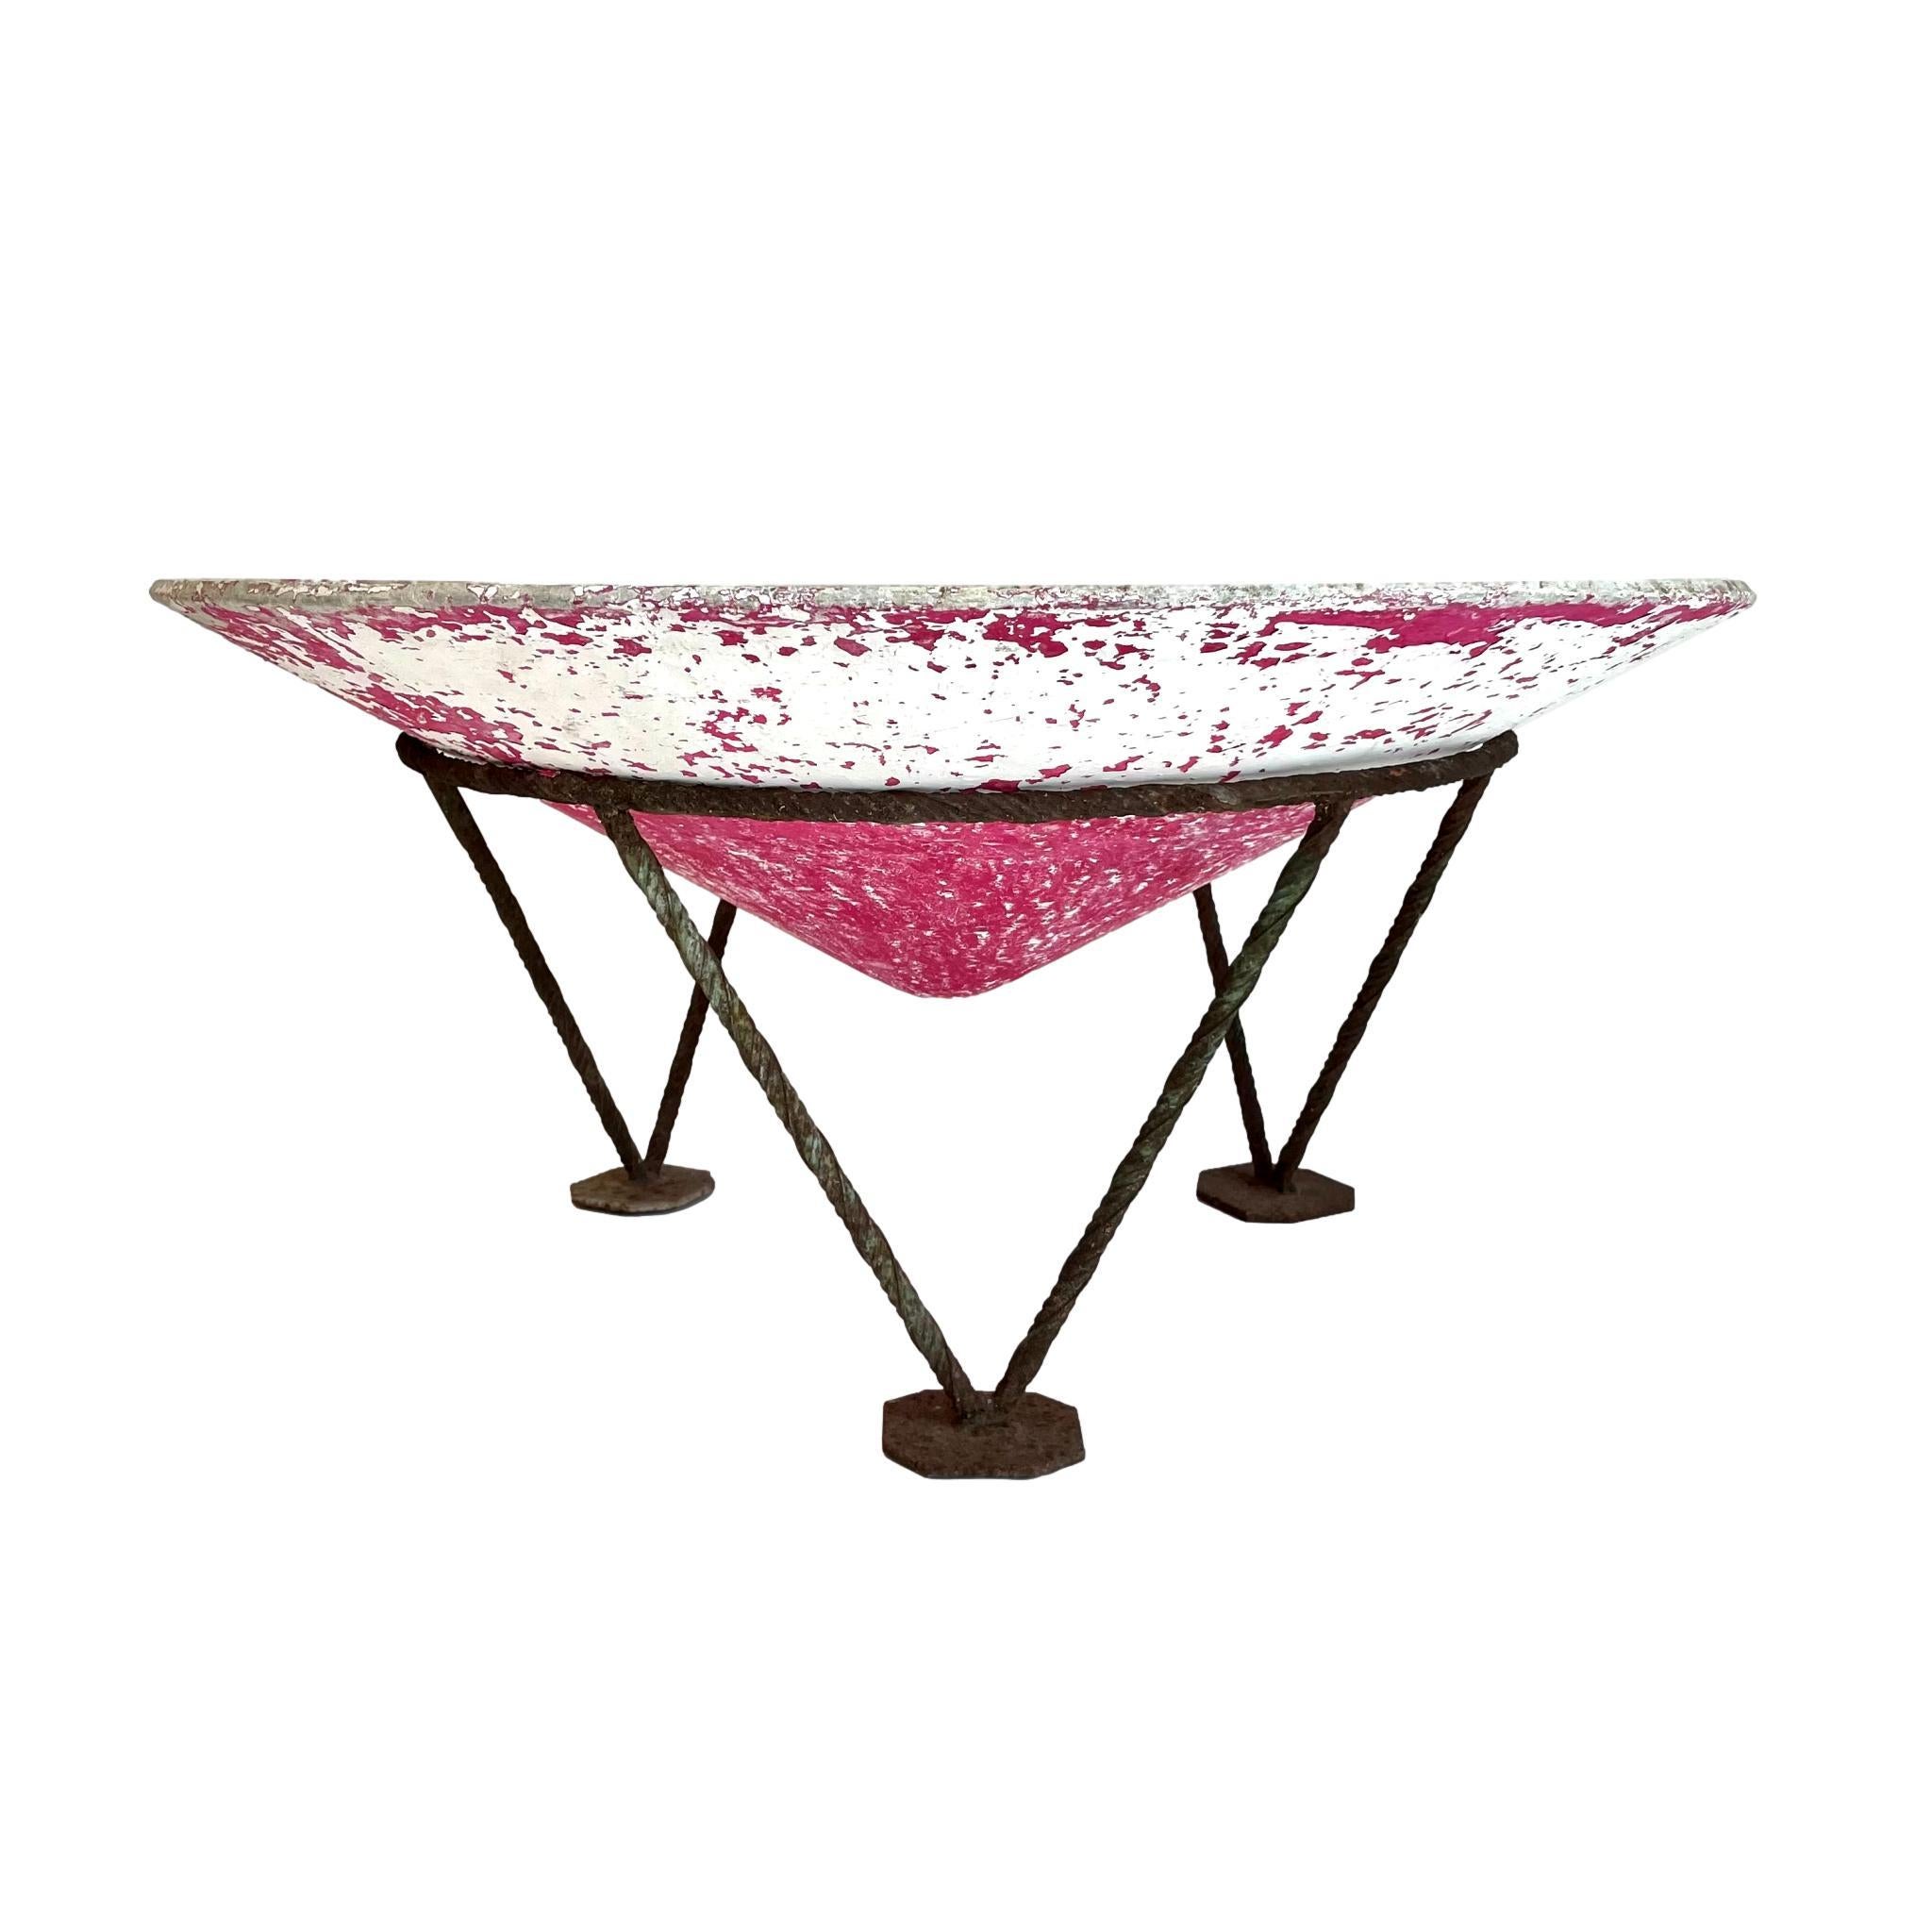 Willy Guhl Pink Concrete Cone Planter on Iron Stand